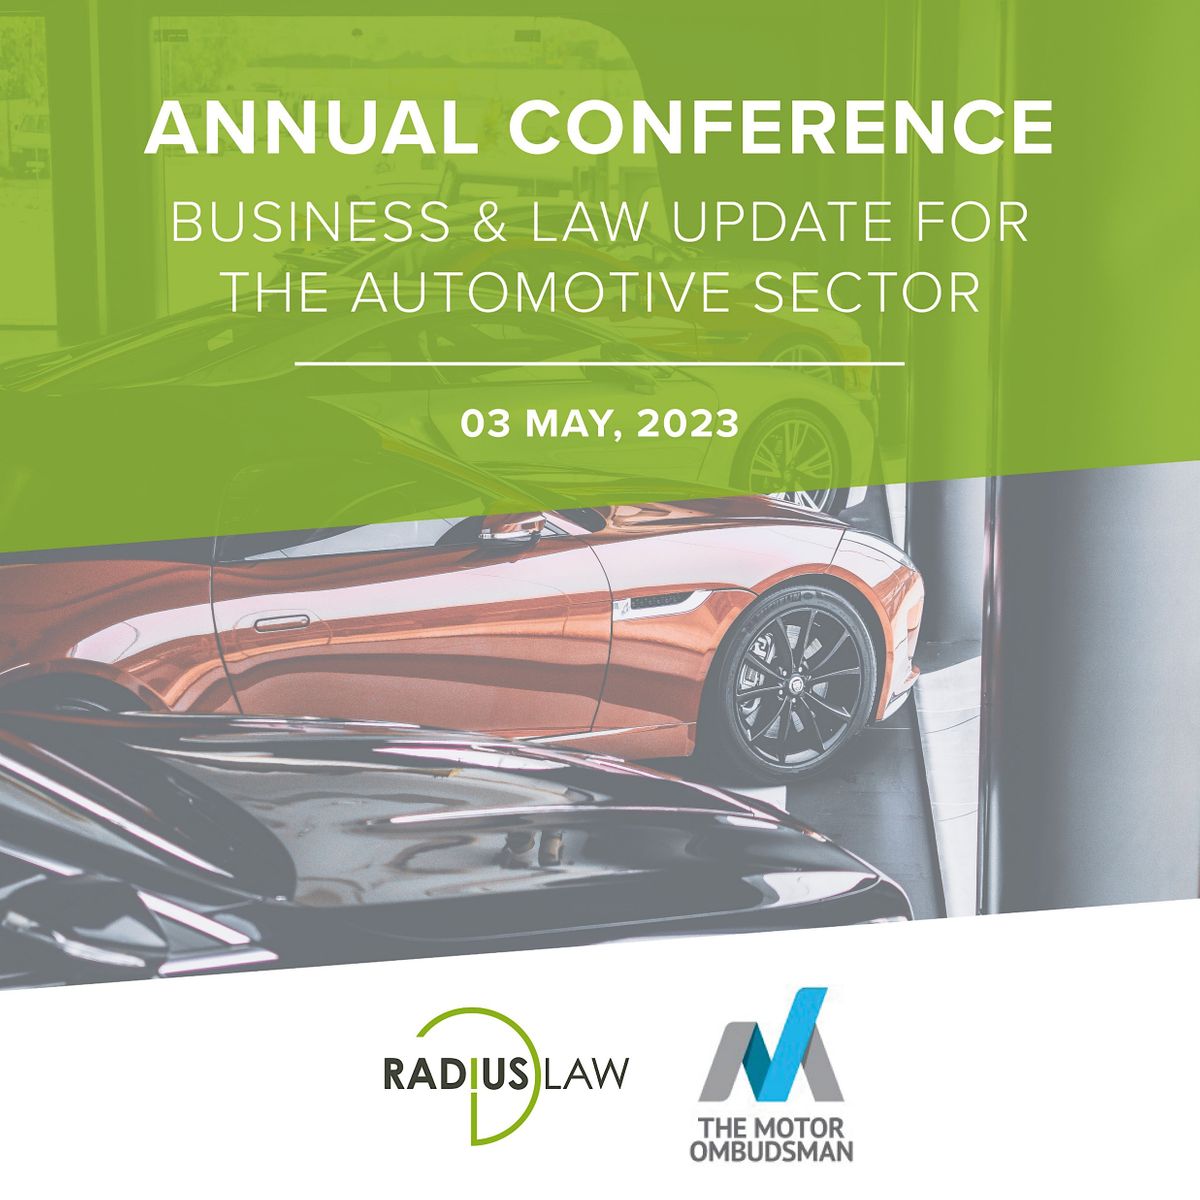 Annual Conference - Business & Law Update for the Automotive Sector